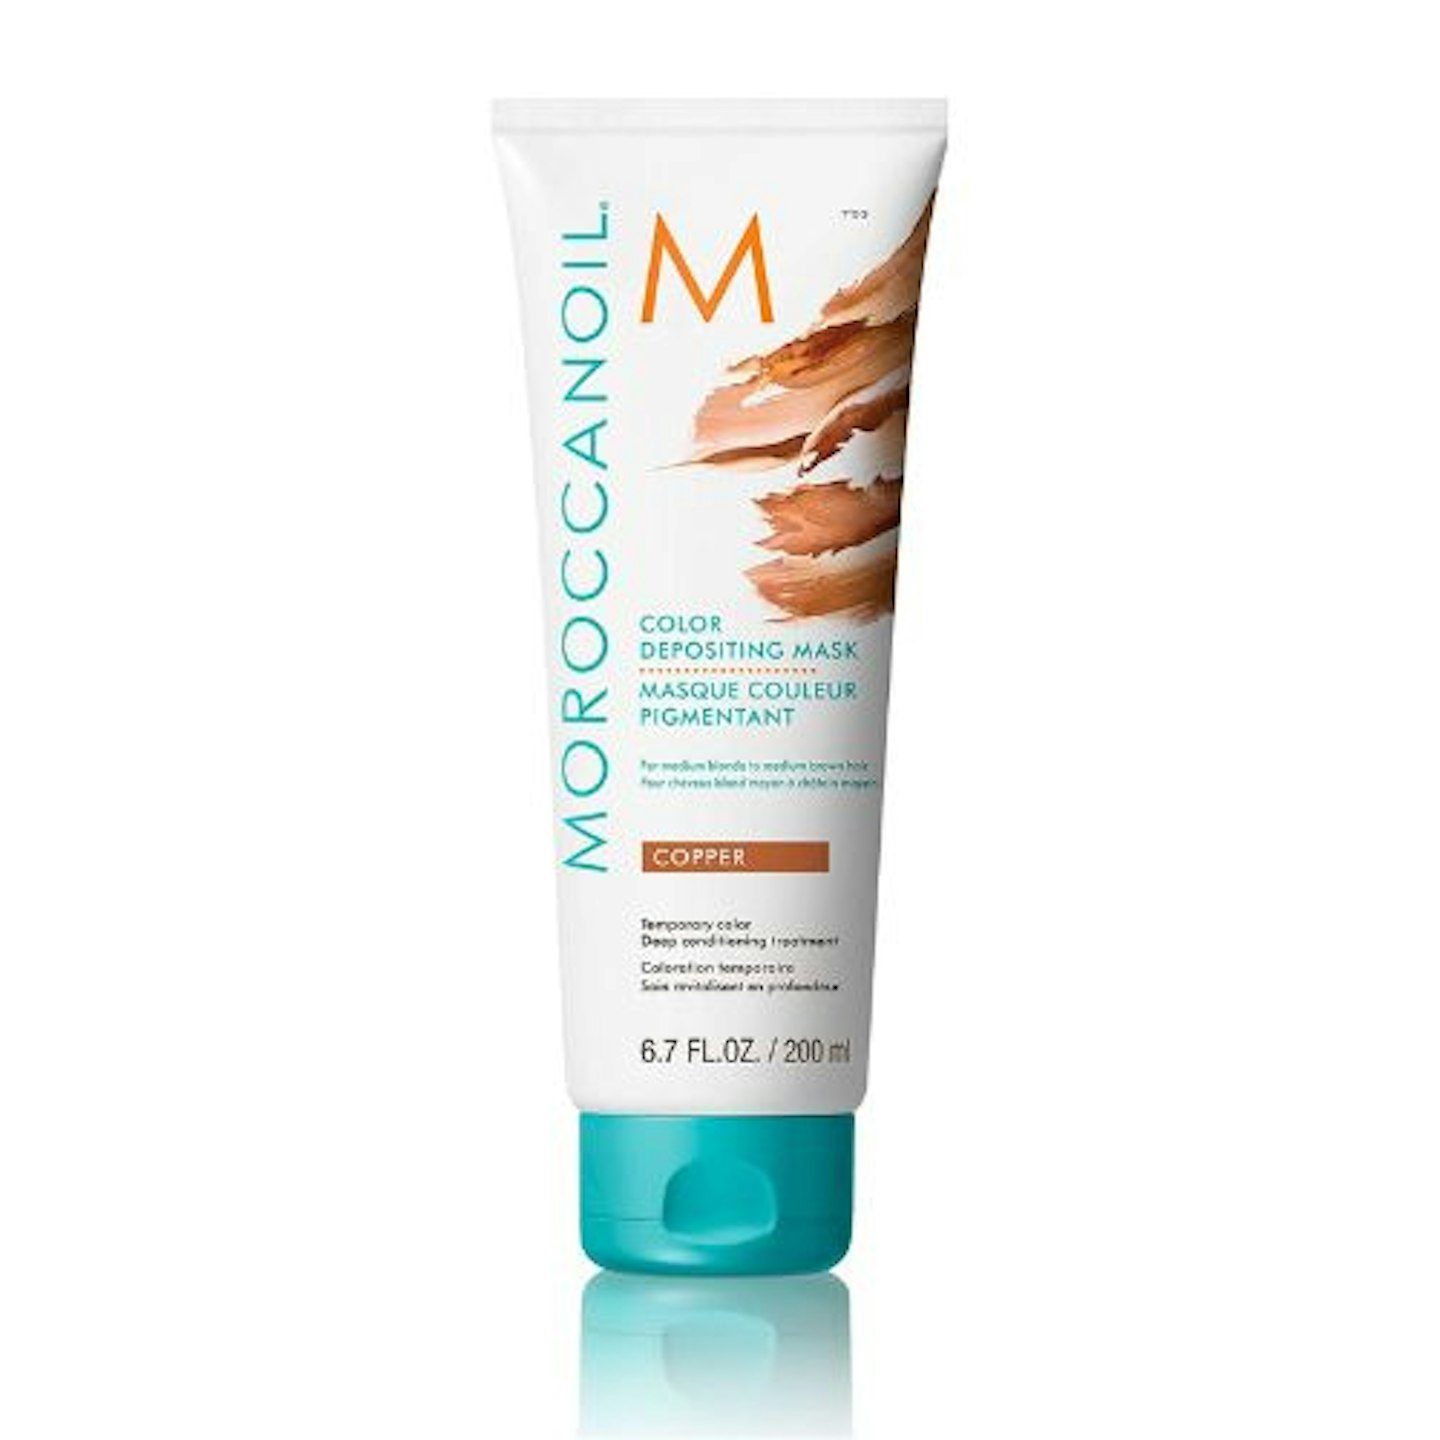 Moroccanoil Colour Depositing Hair Mask in Copper